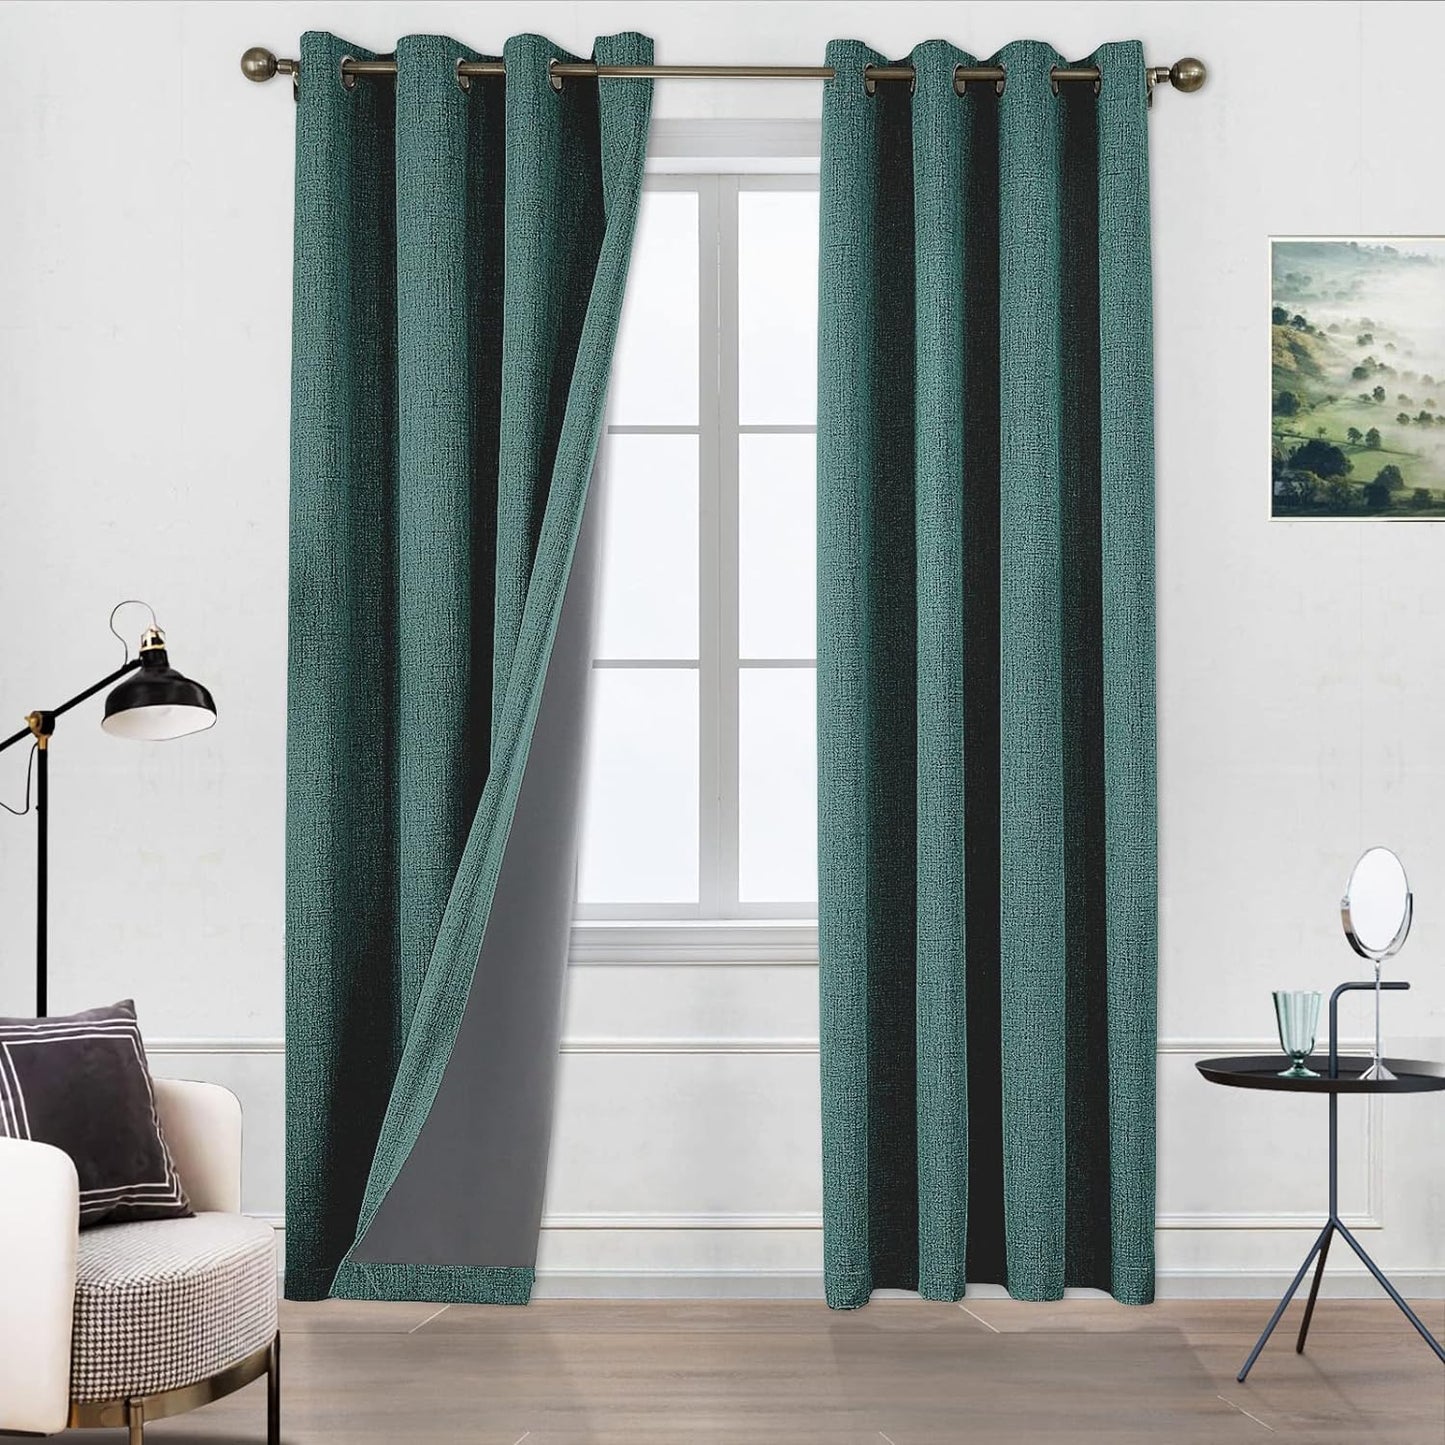 CUCRAF 100% Blackout Window Curtains for Bedroom Noise Reducing,Thermal Insulated Room Darkening Grommet Drapes for Living Room,2 Panels Sets(52 X 95 Inches, Light Khaki)  CUCRAF Hunter Green 52 X 95 Inches 